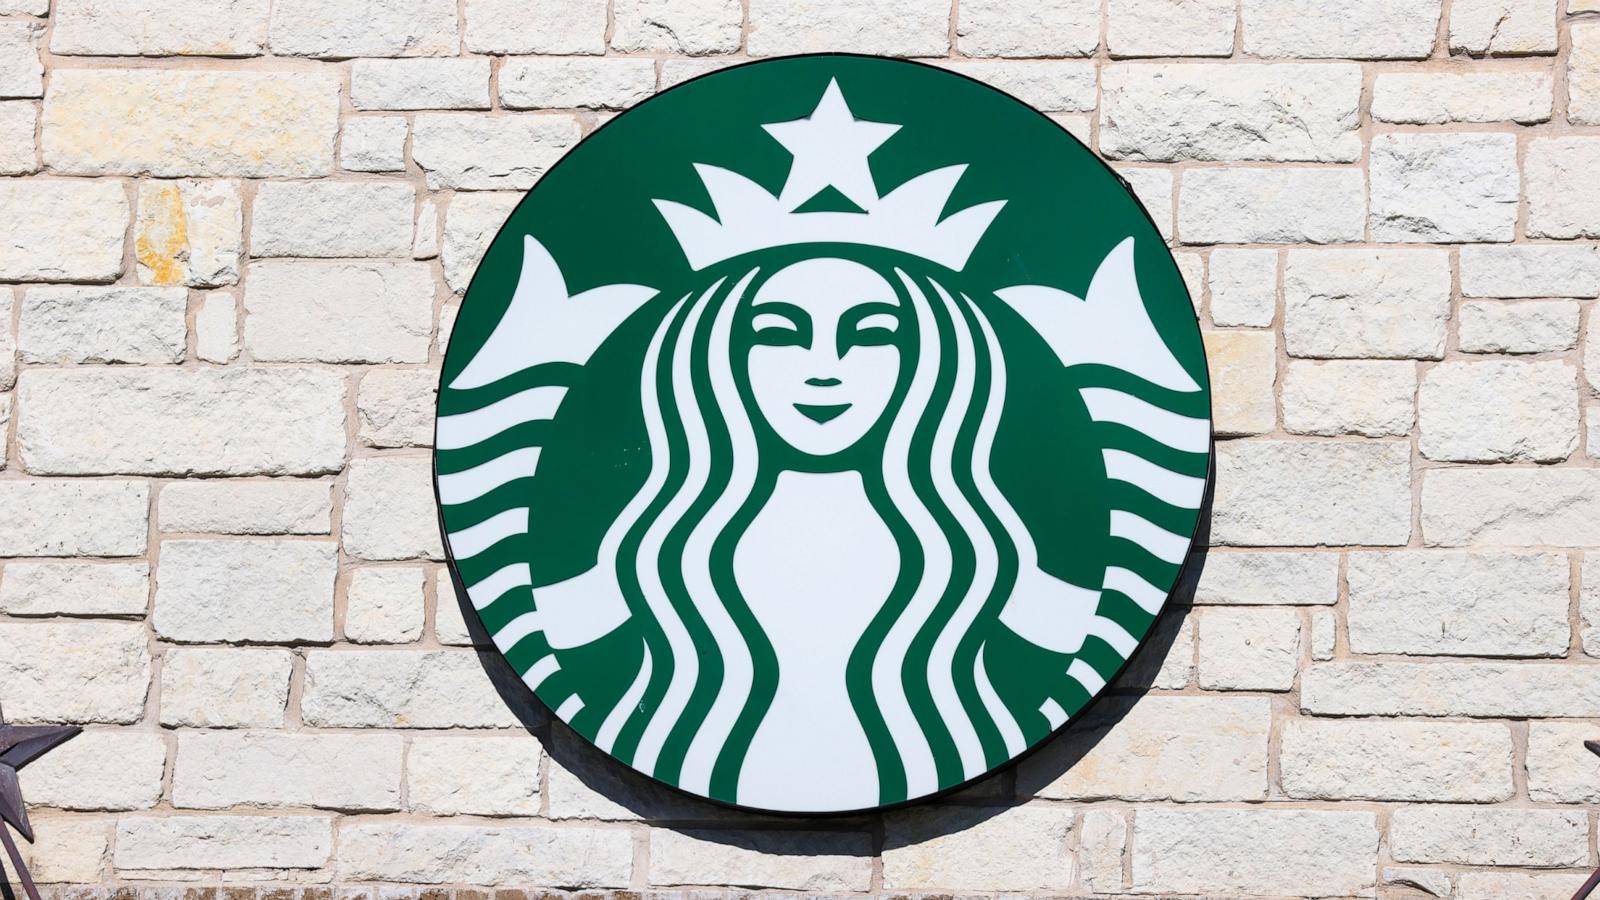 Customers can now bring personal cups to Starbucks stores, drive-thrus